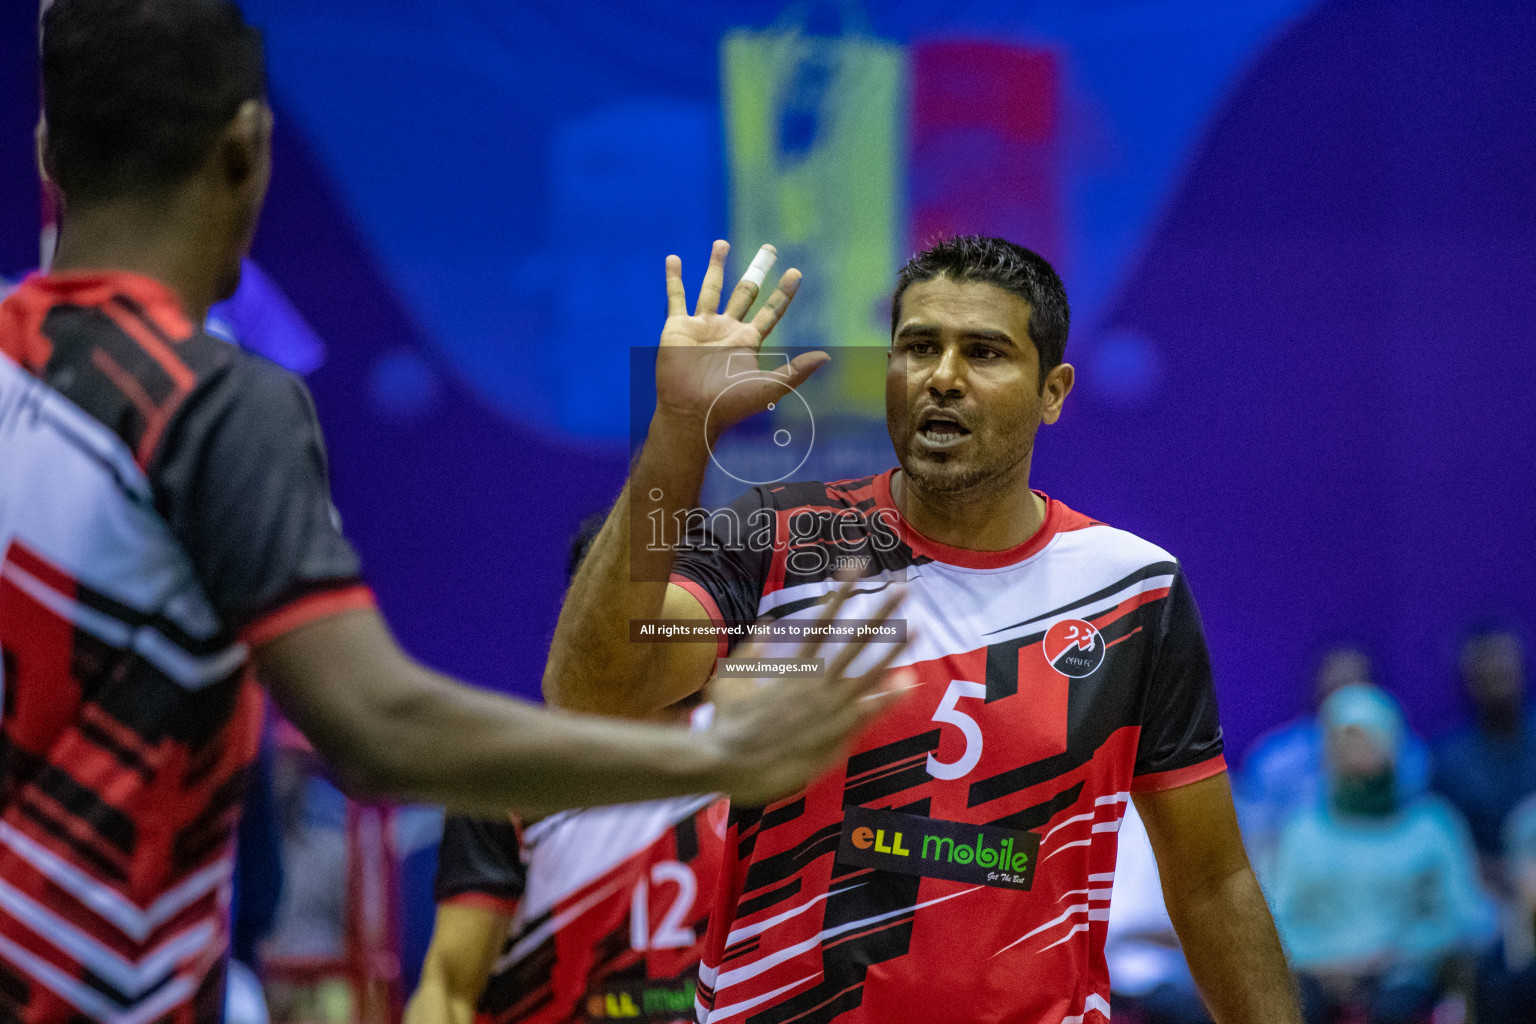 Volleyball Association Cup 2022- Men's Division-Match Day 4 held in Male', Maldives on Saturday, 14th June 2022 at Social Center Indoor Hall Photos By: Nausham Waheed /images.mv